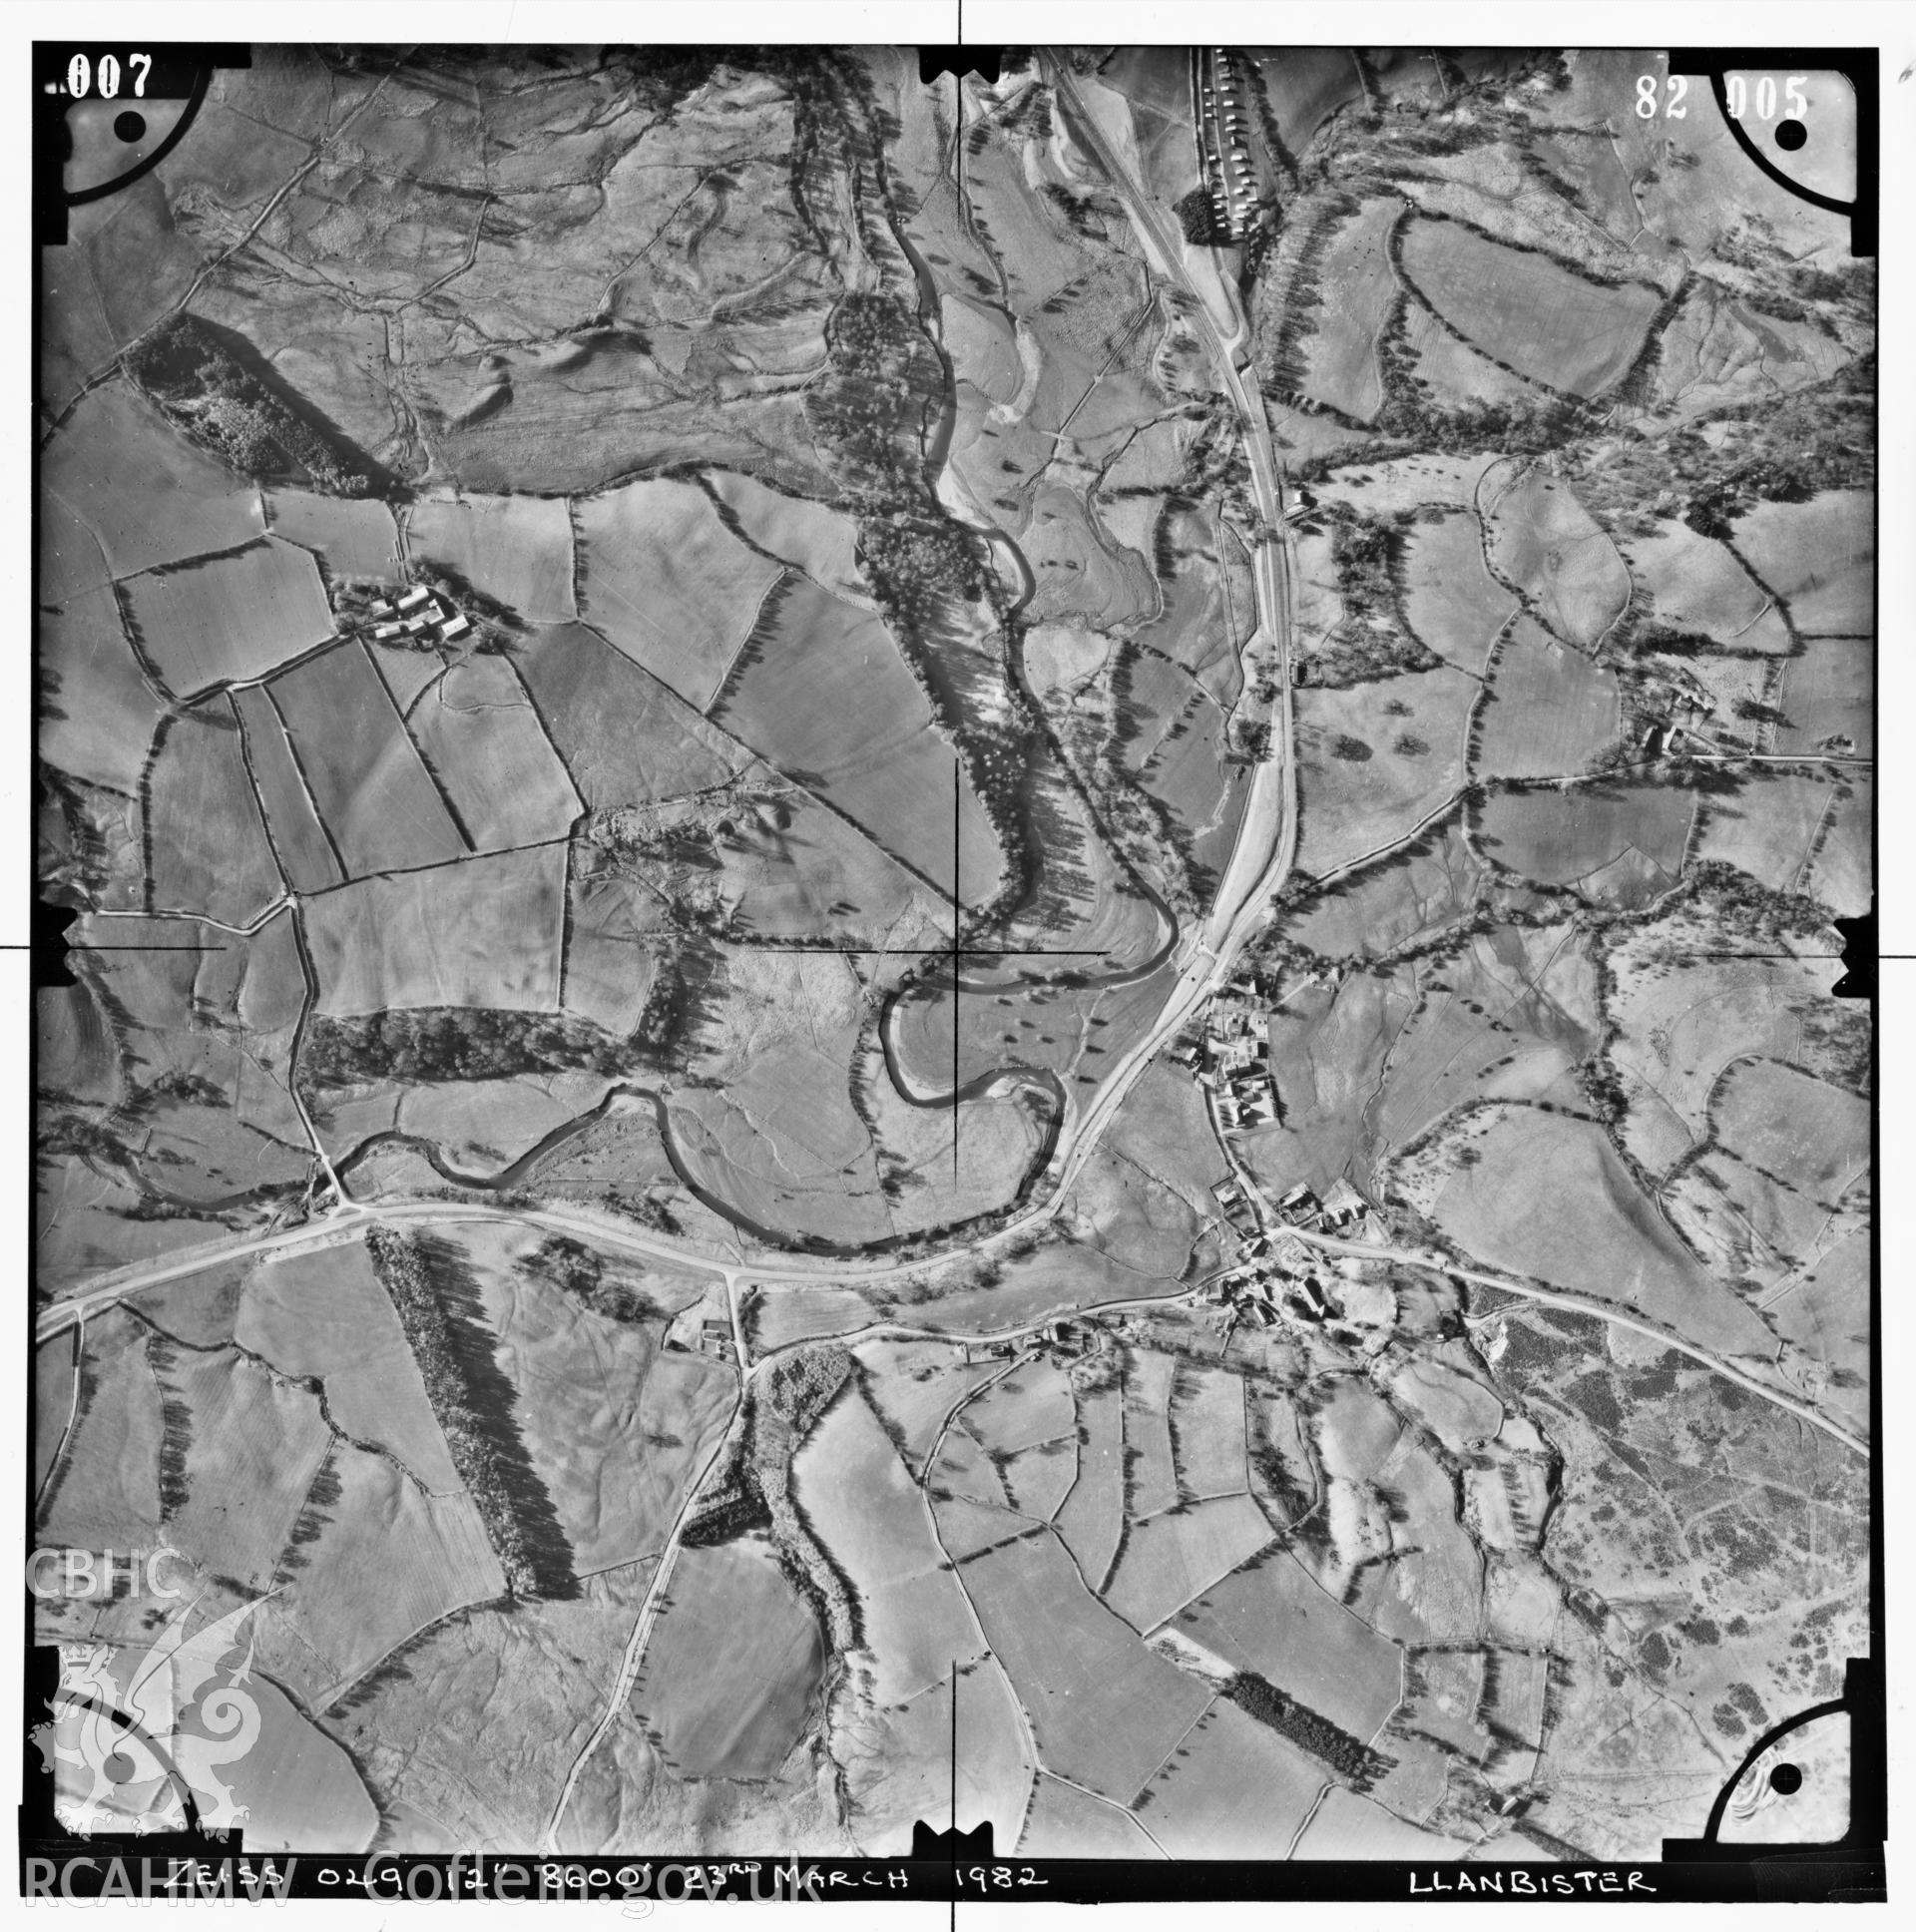 Digitized copy of an aerial photograph showing Llanbister, taken by Ordnance Survey, 1982.